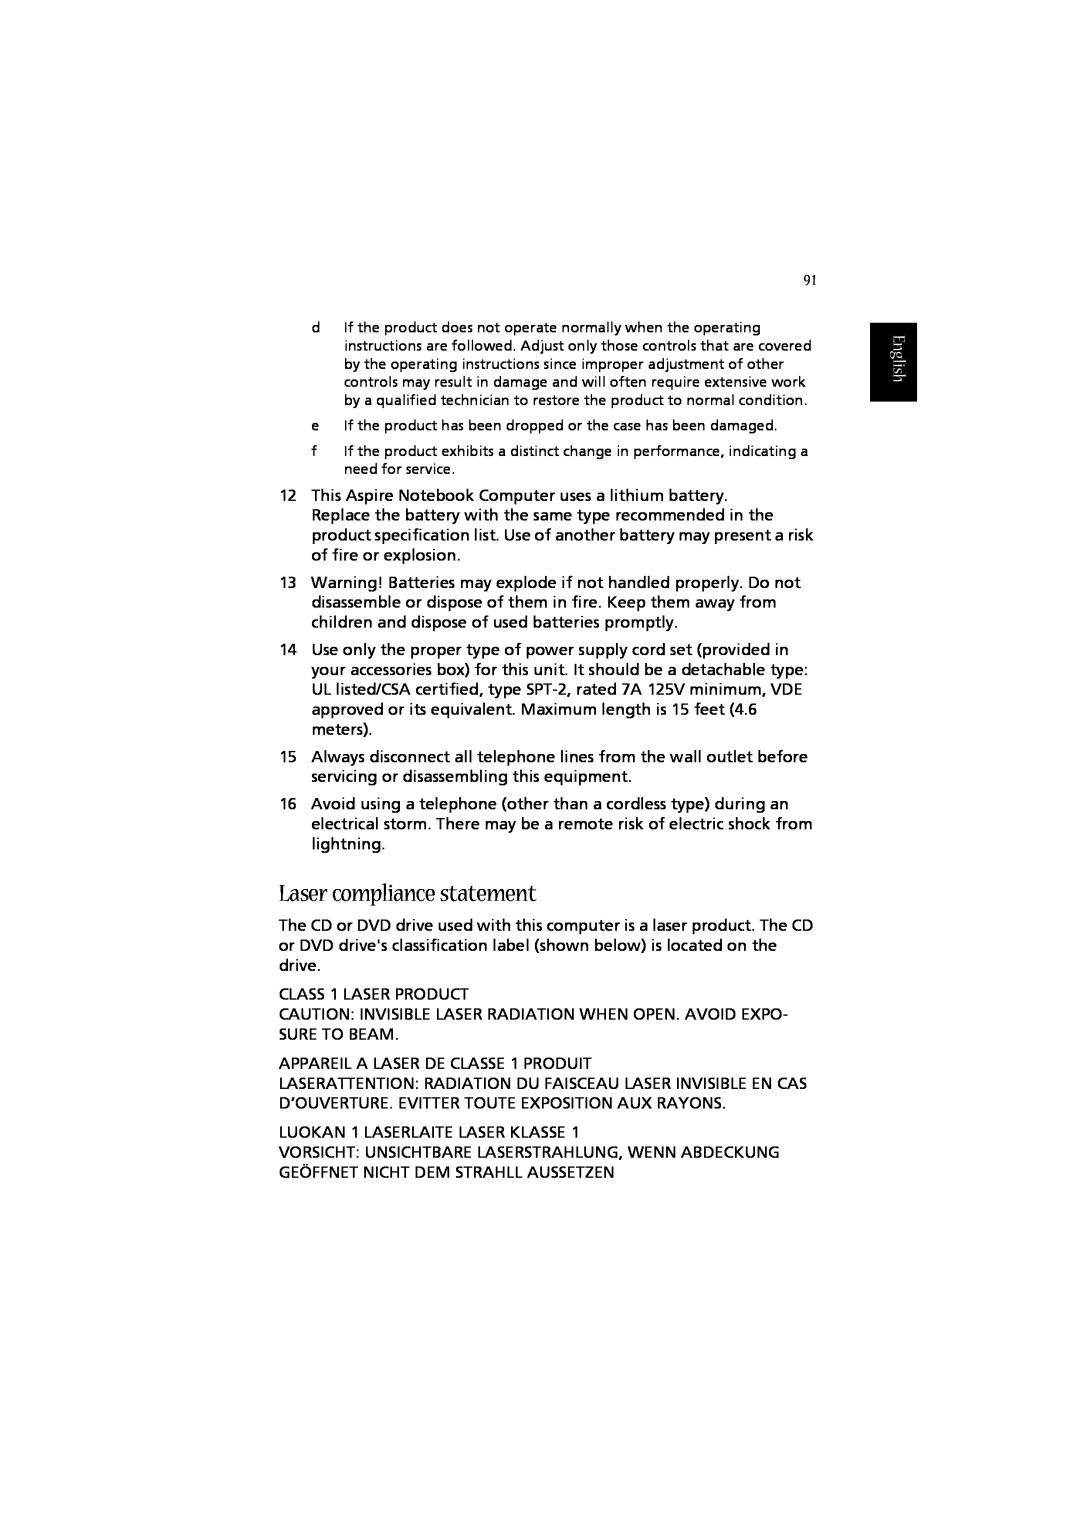 Acer 2010 manual Laser compliance statement, English 